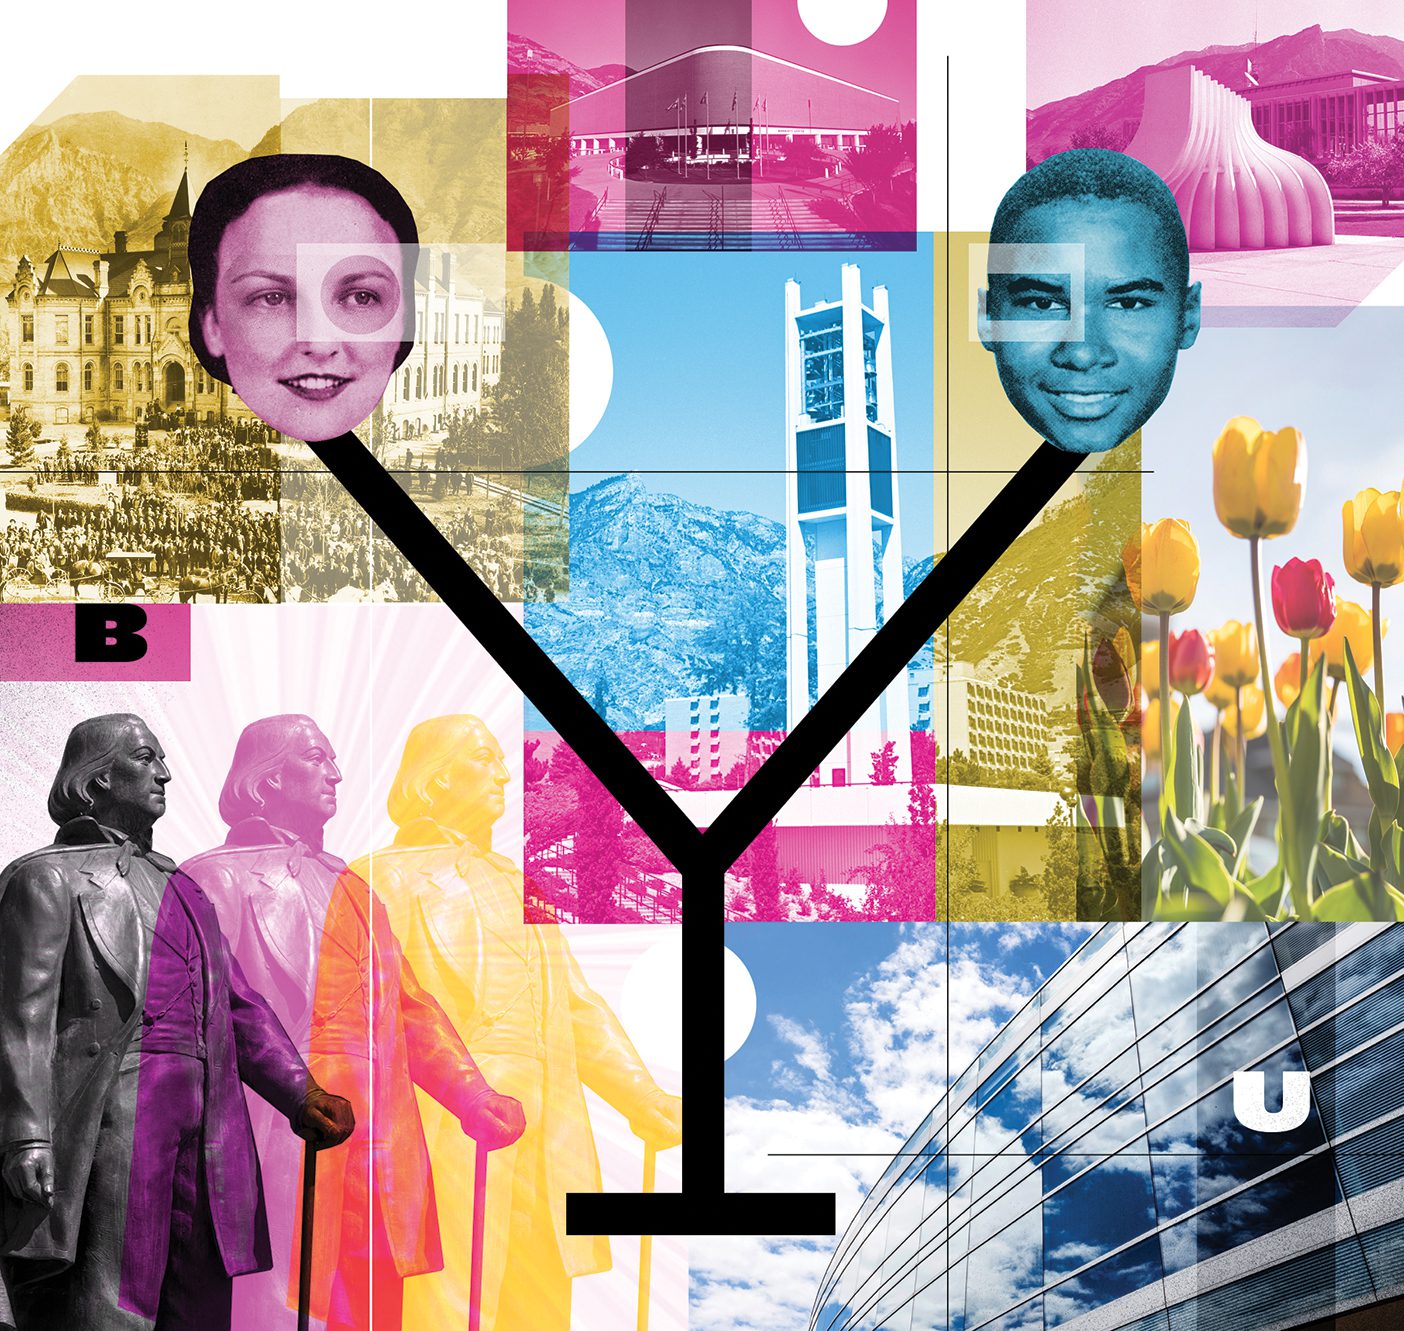 Collage of images related to BYU with the letters B, Y, and U.